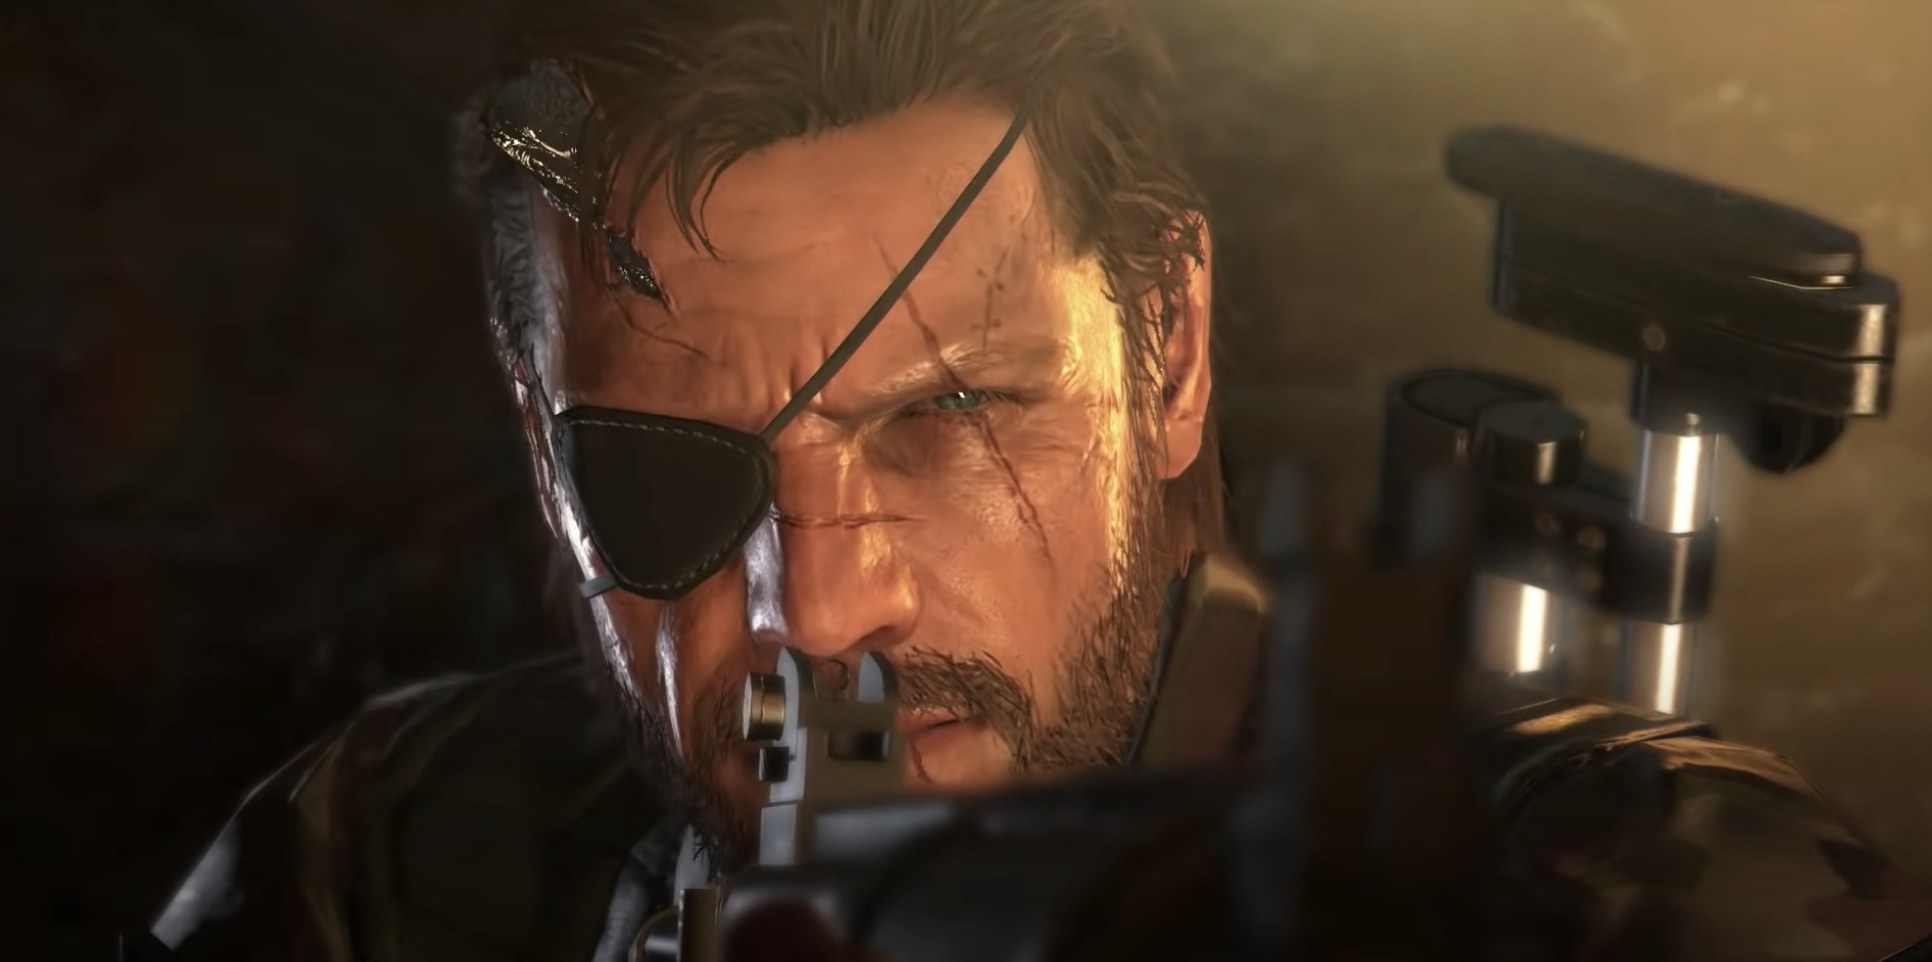 A man with an eyepatch looks down the scope of a gun.